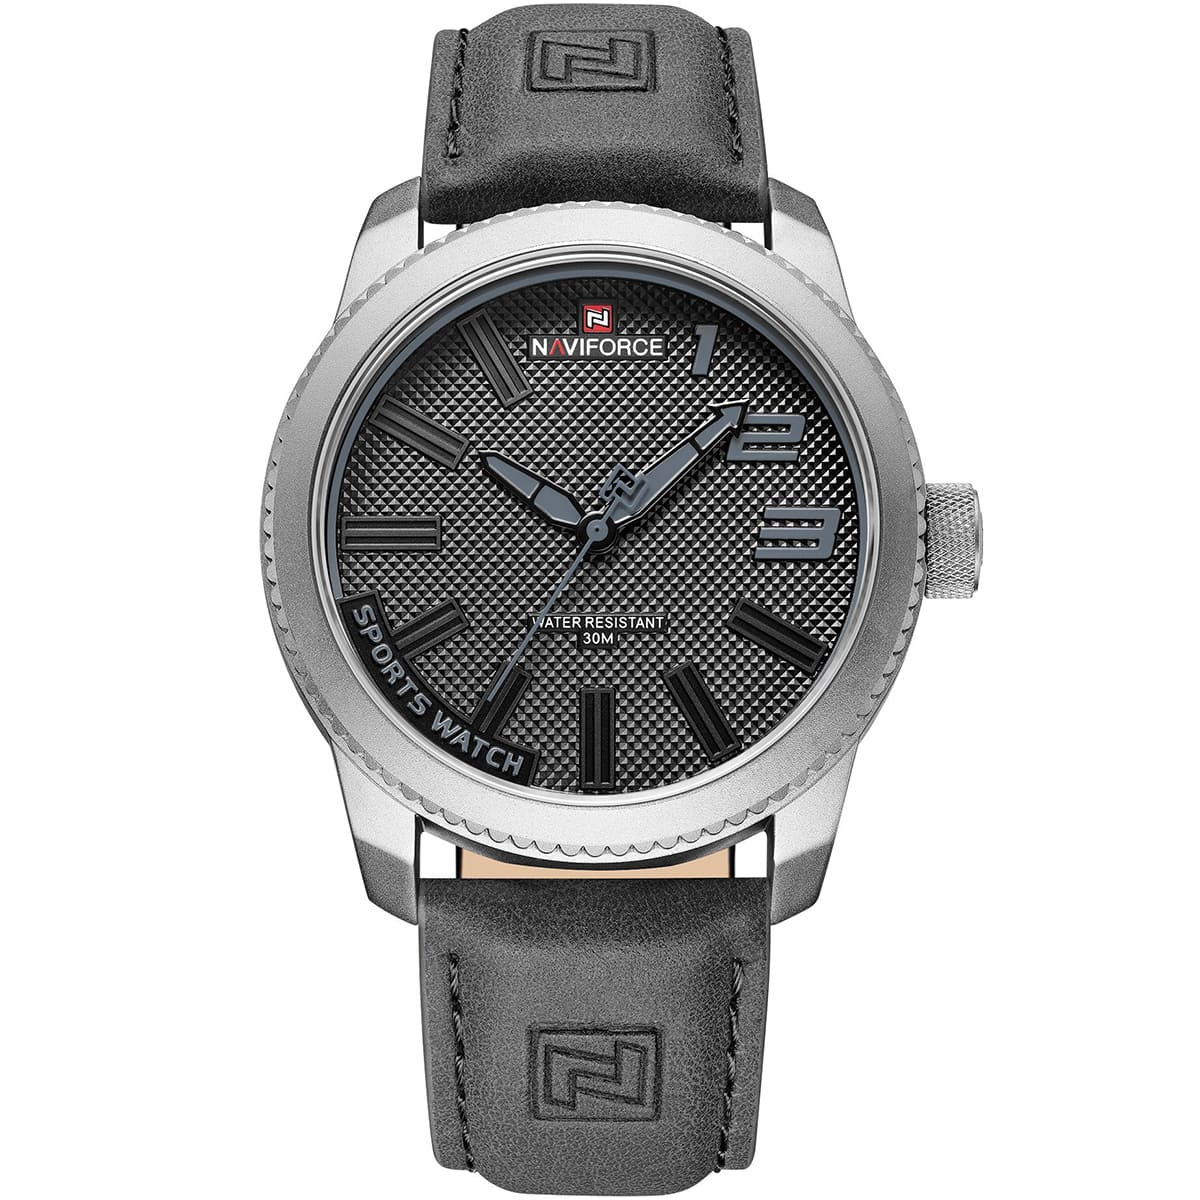 nf9202l-s-gy-gy-naviforce-water-resistant-30m-sports-watch-men-Gray-dial-leather-gray-strap-quartz-battery-analog-for-dream